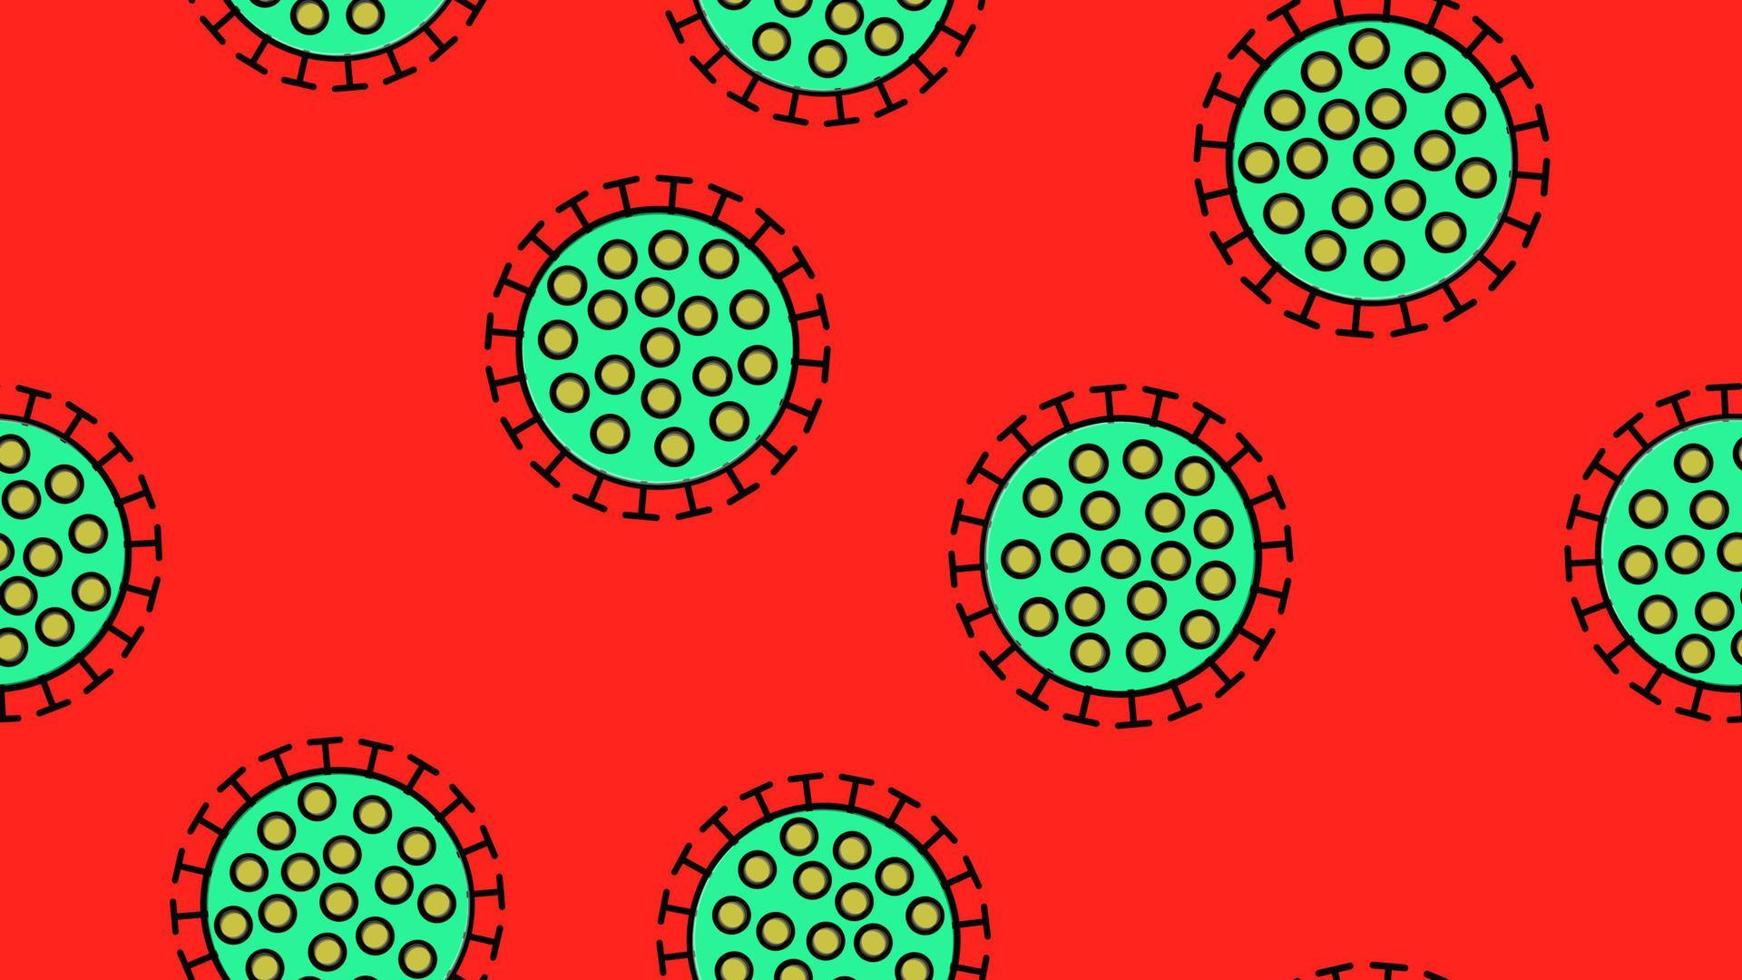 Endless seamless pattern of green dangerous infectious deadly respiratory coronaviruses pandemic epidemic, Covid-19 microbe viruses causing pneumonia on a red background vector